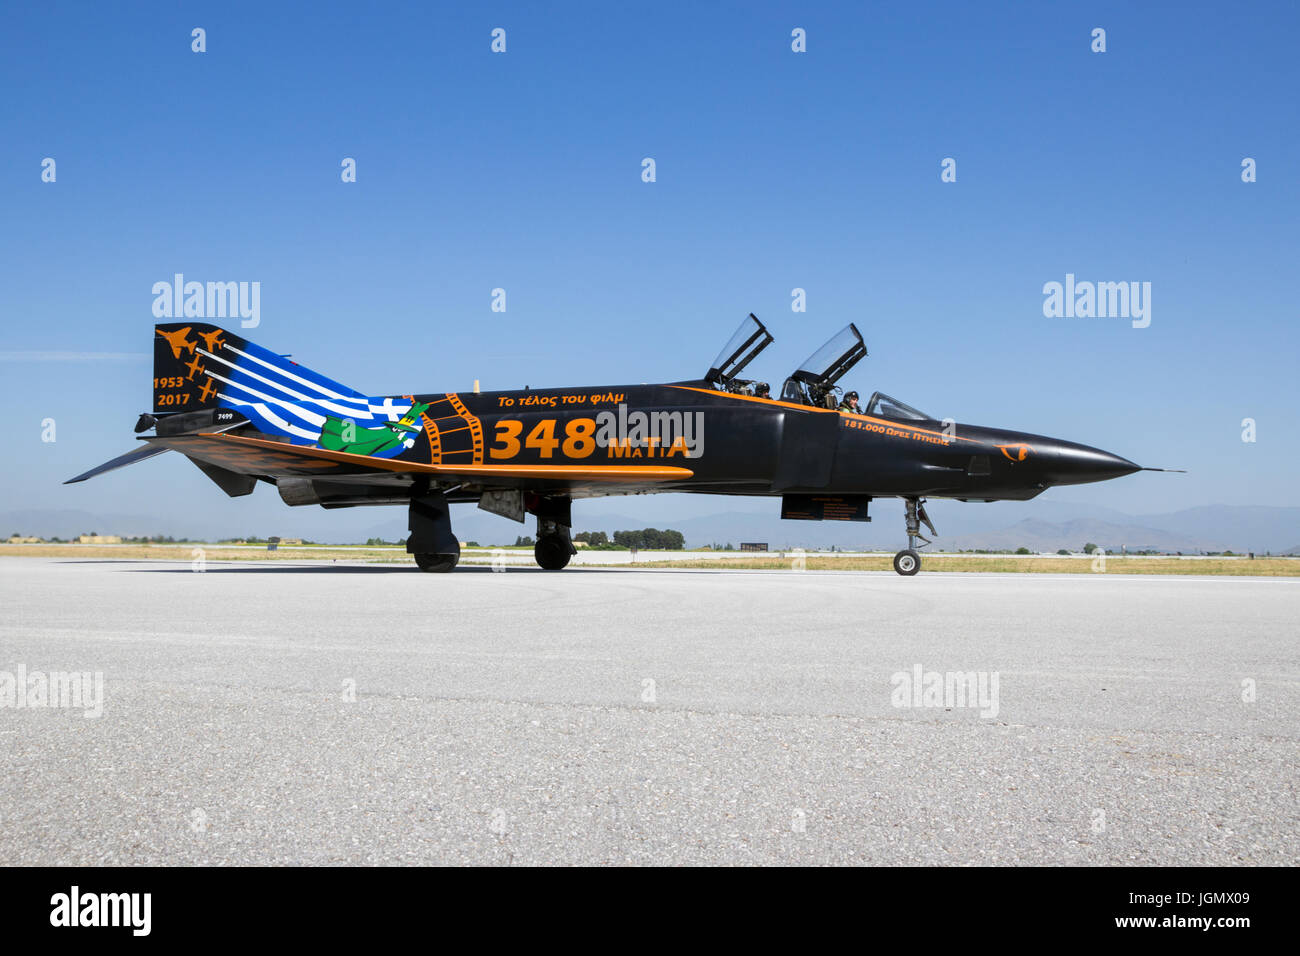 LARISSA, GREECE - MAY 4, 2017: Special painted Hellenic Air Force RF-4E Phantom II fighter jet plane taxiing after one of its last flights. 348 Reconn Stock Photo